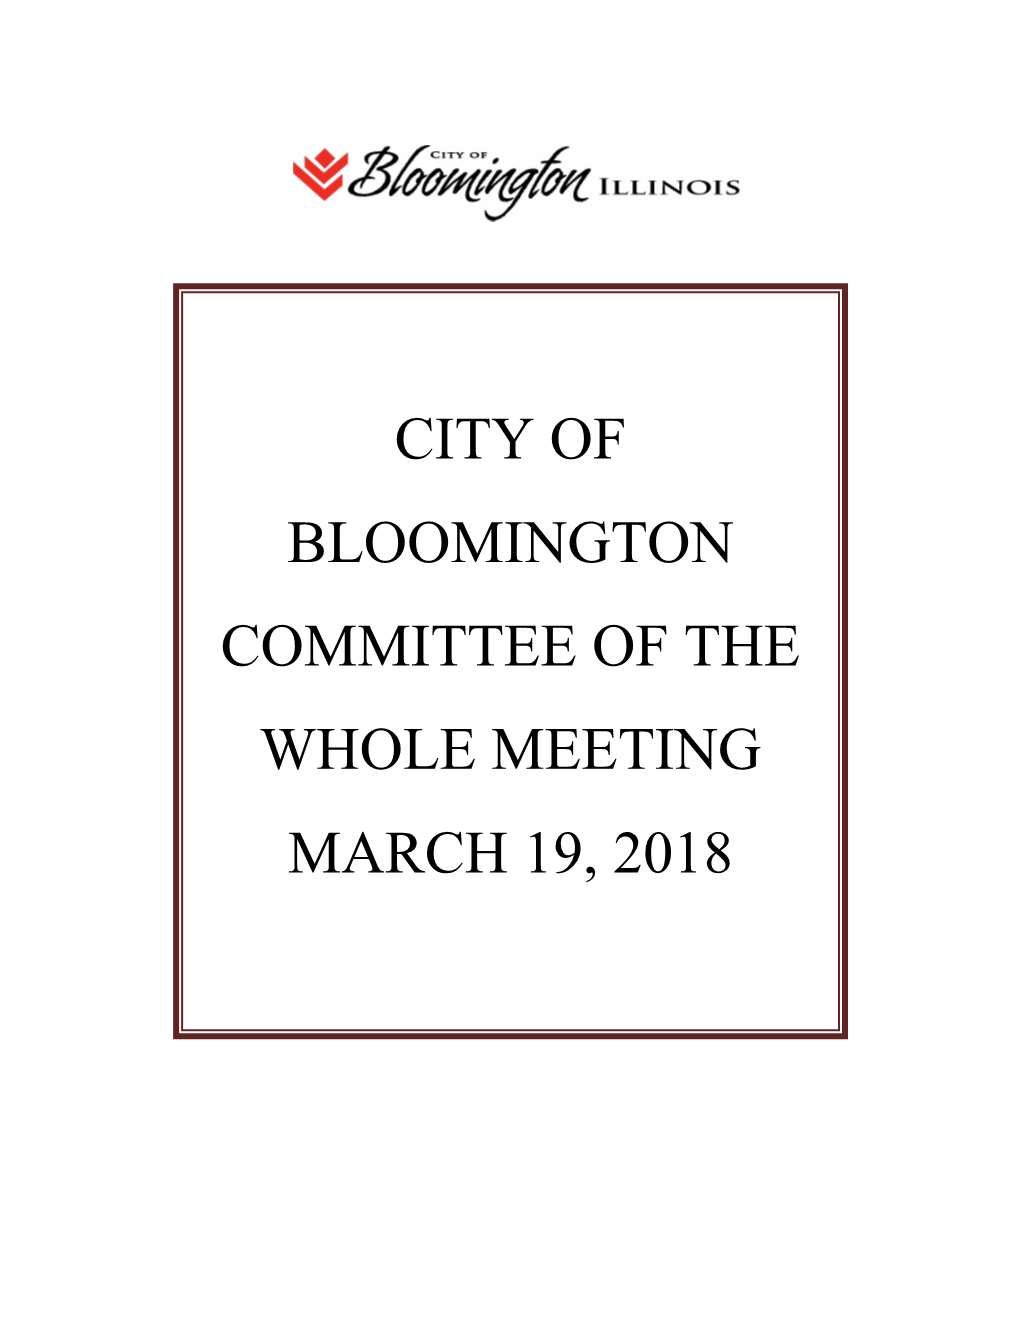 City of Bloomington Committee of the Whole Meeting March 19, 2018